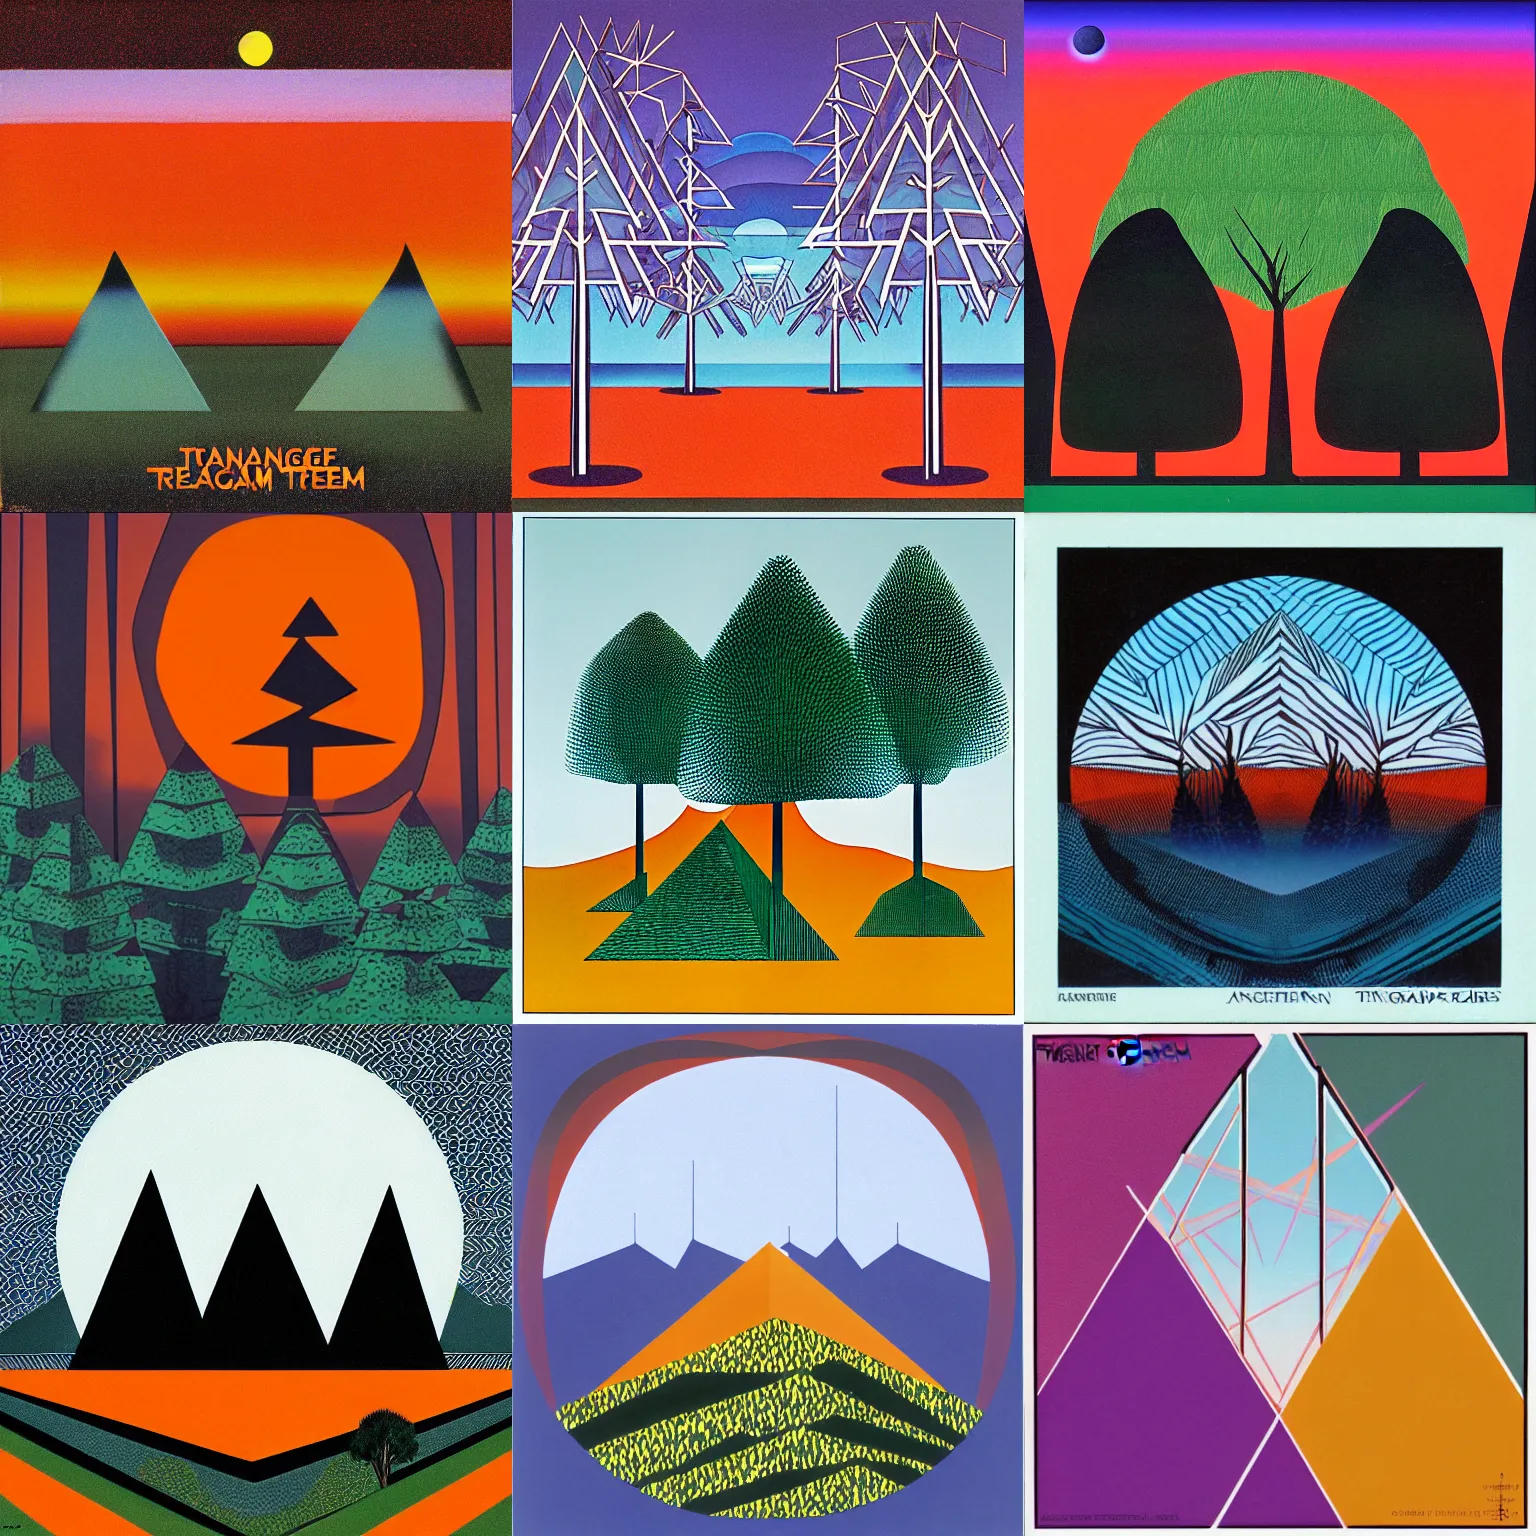 Prompt: Tangerine Dream Album Cover, geometric trees and mountains, 1970s